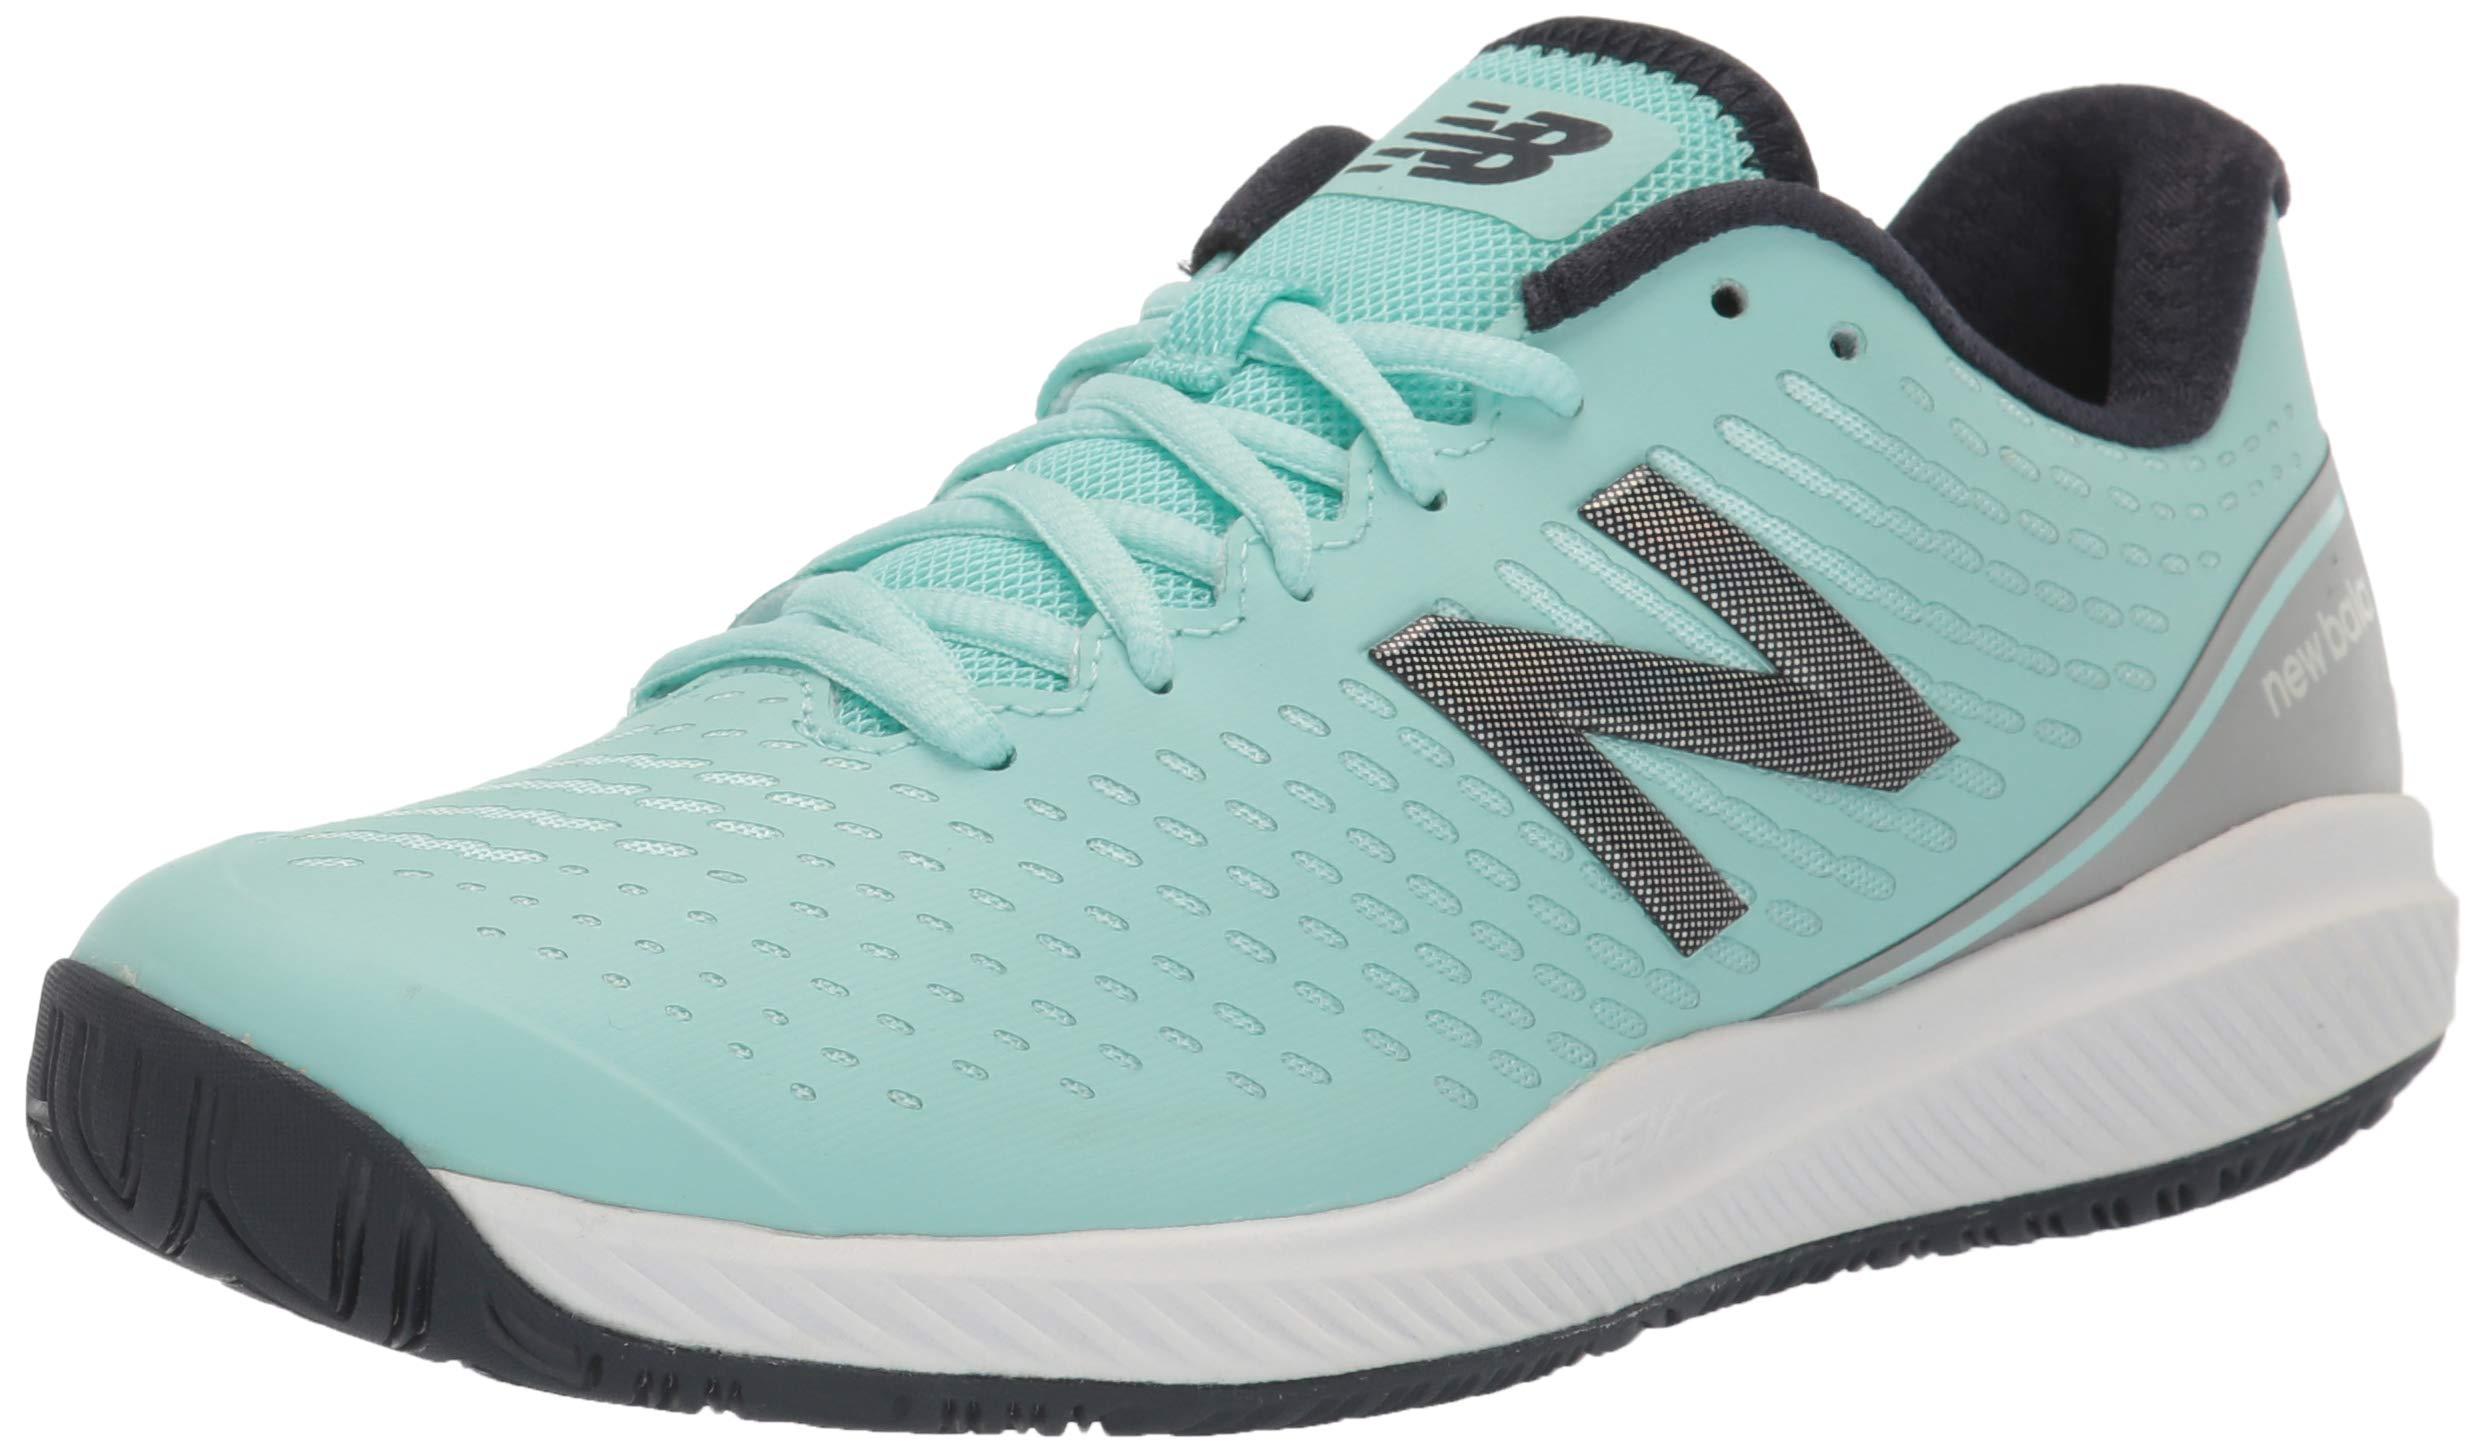 New Balance 796 V2 Hard Court Tennis Shoe in Blue - Save 54% - Lyst